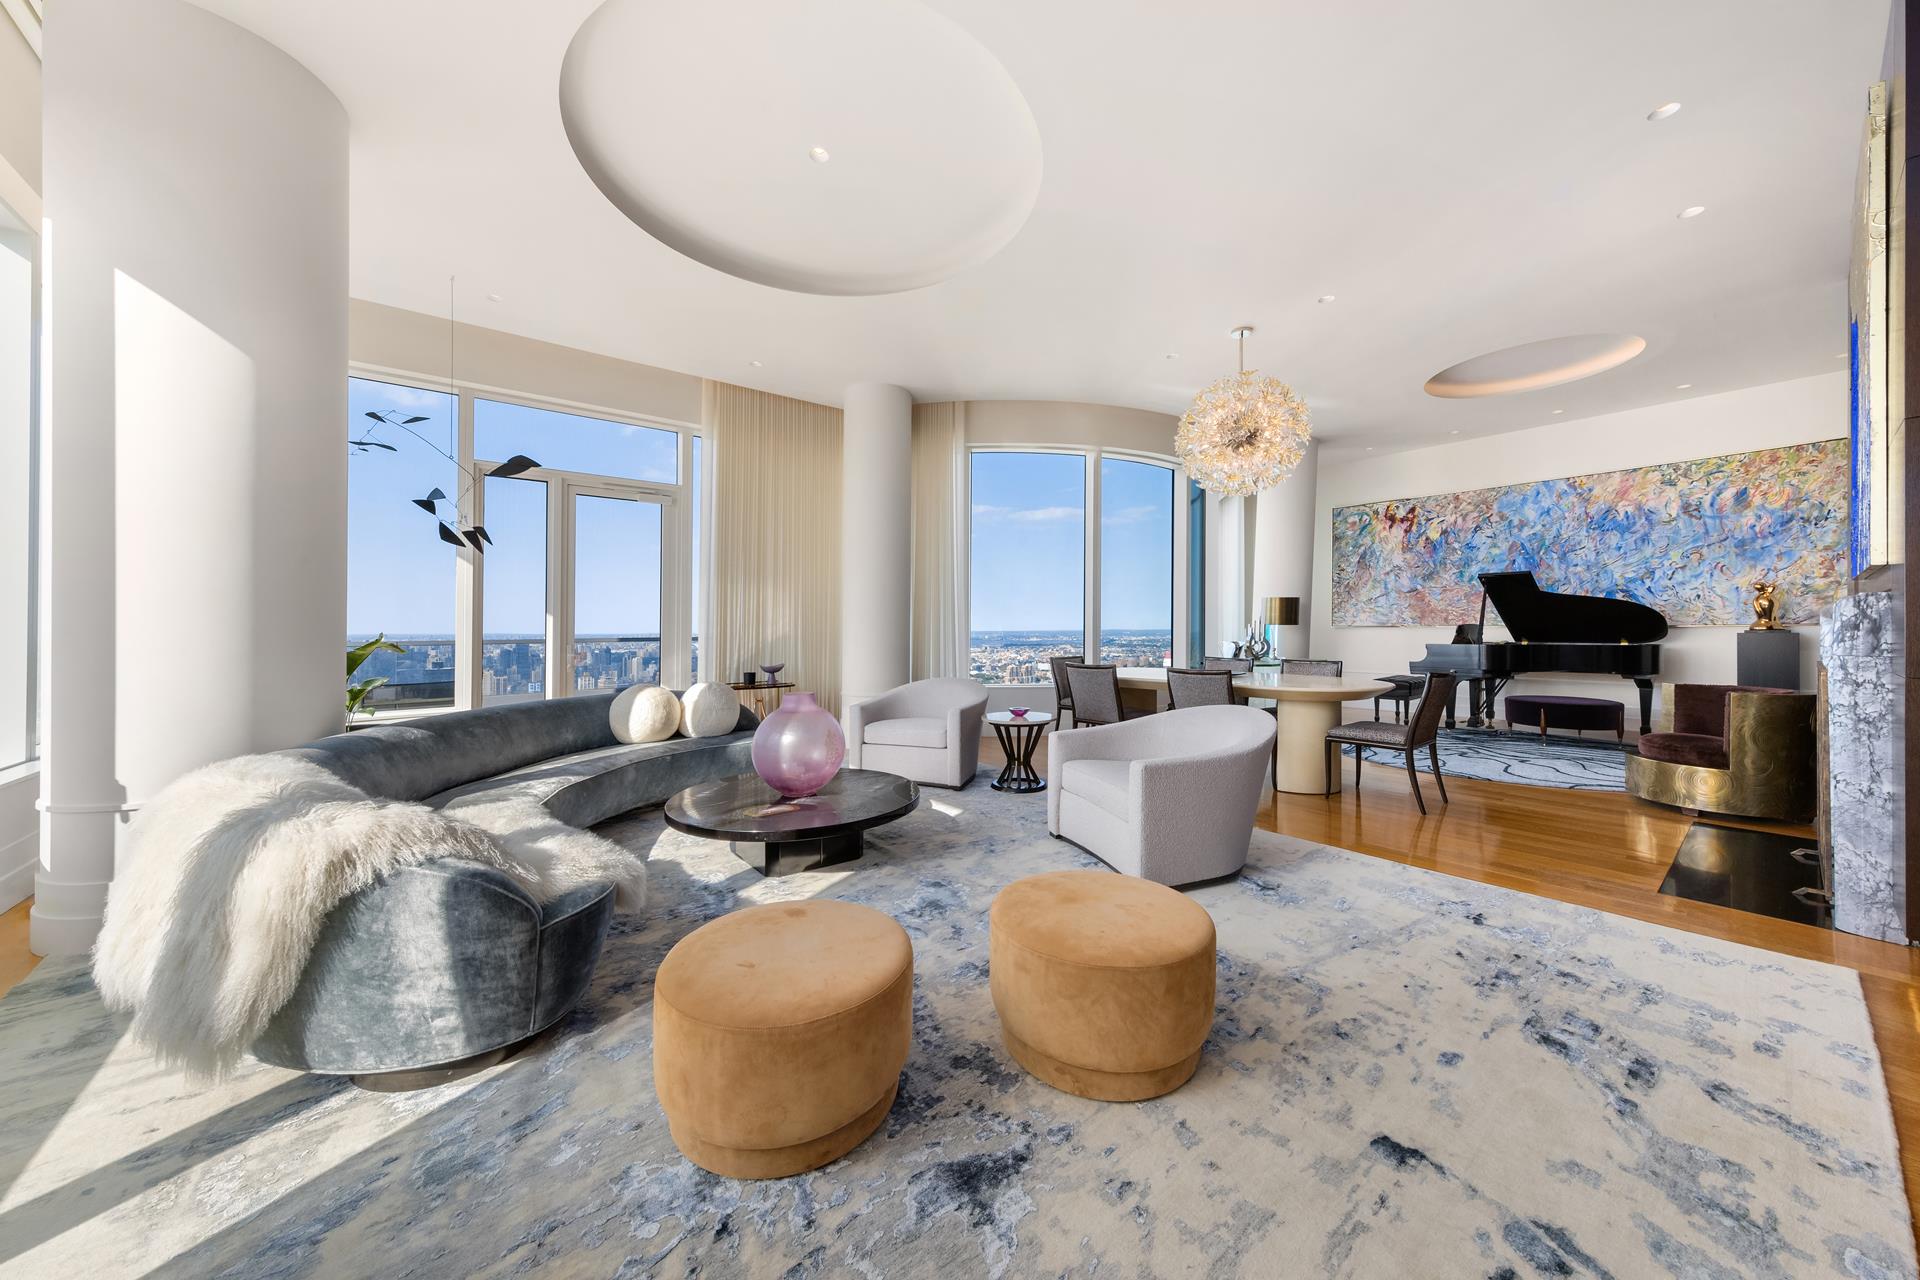 252 East 57th Street 60A, Sutton Place, Midtown East, NYC - 4 Bedrooms  
4.5 Bathrooms  
9 Rooms - 